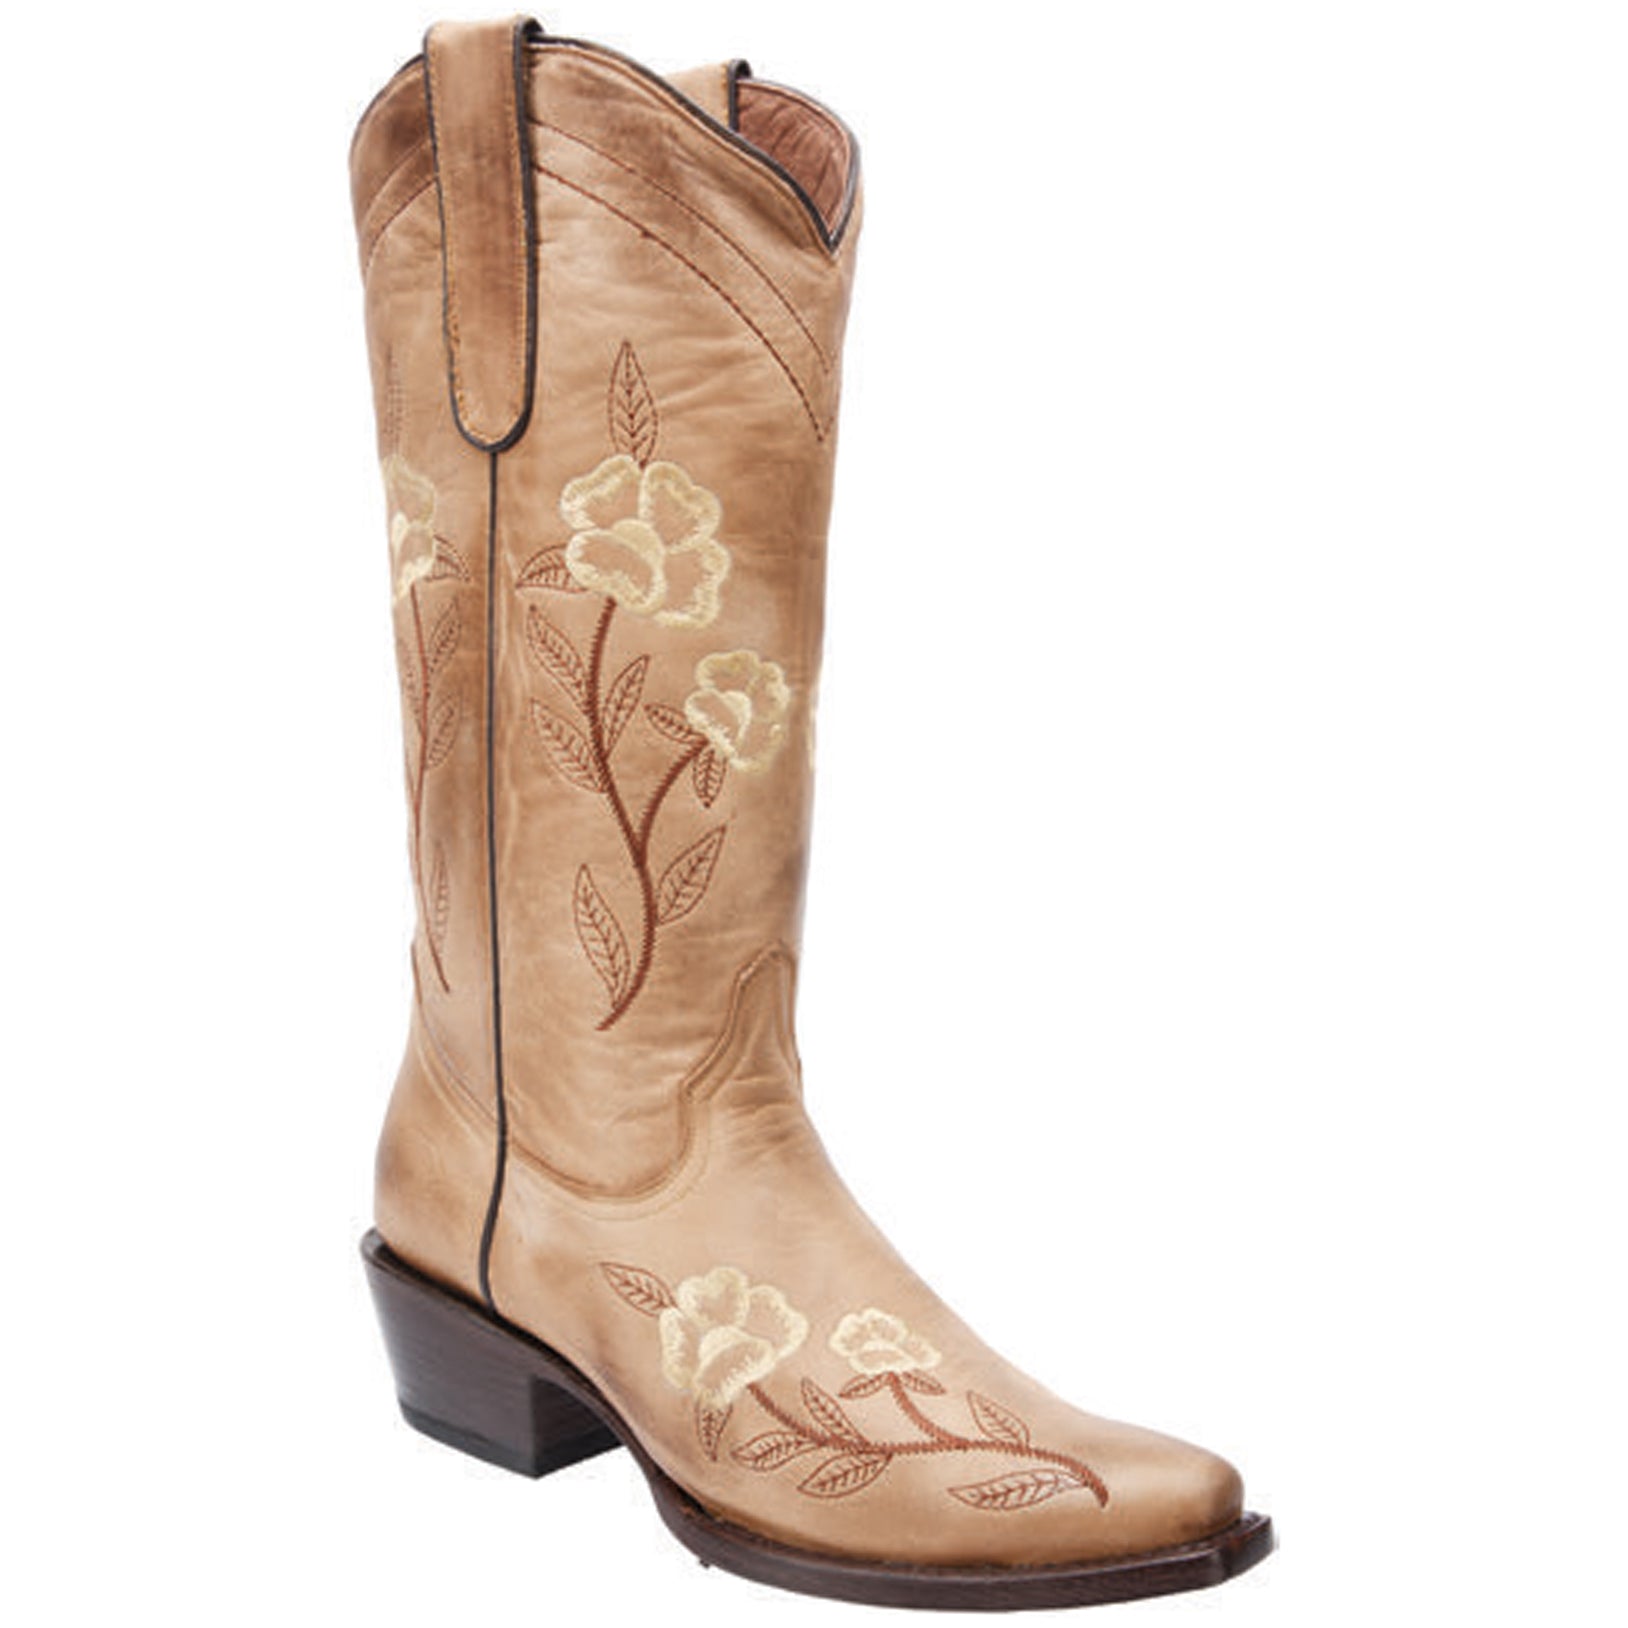 White Diamonds Boots - Flowered Cowgirl Boots